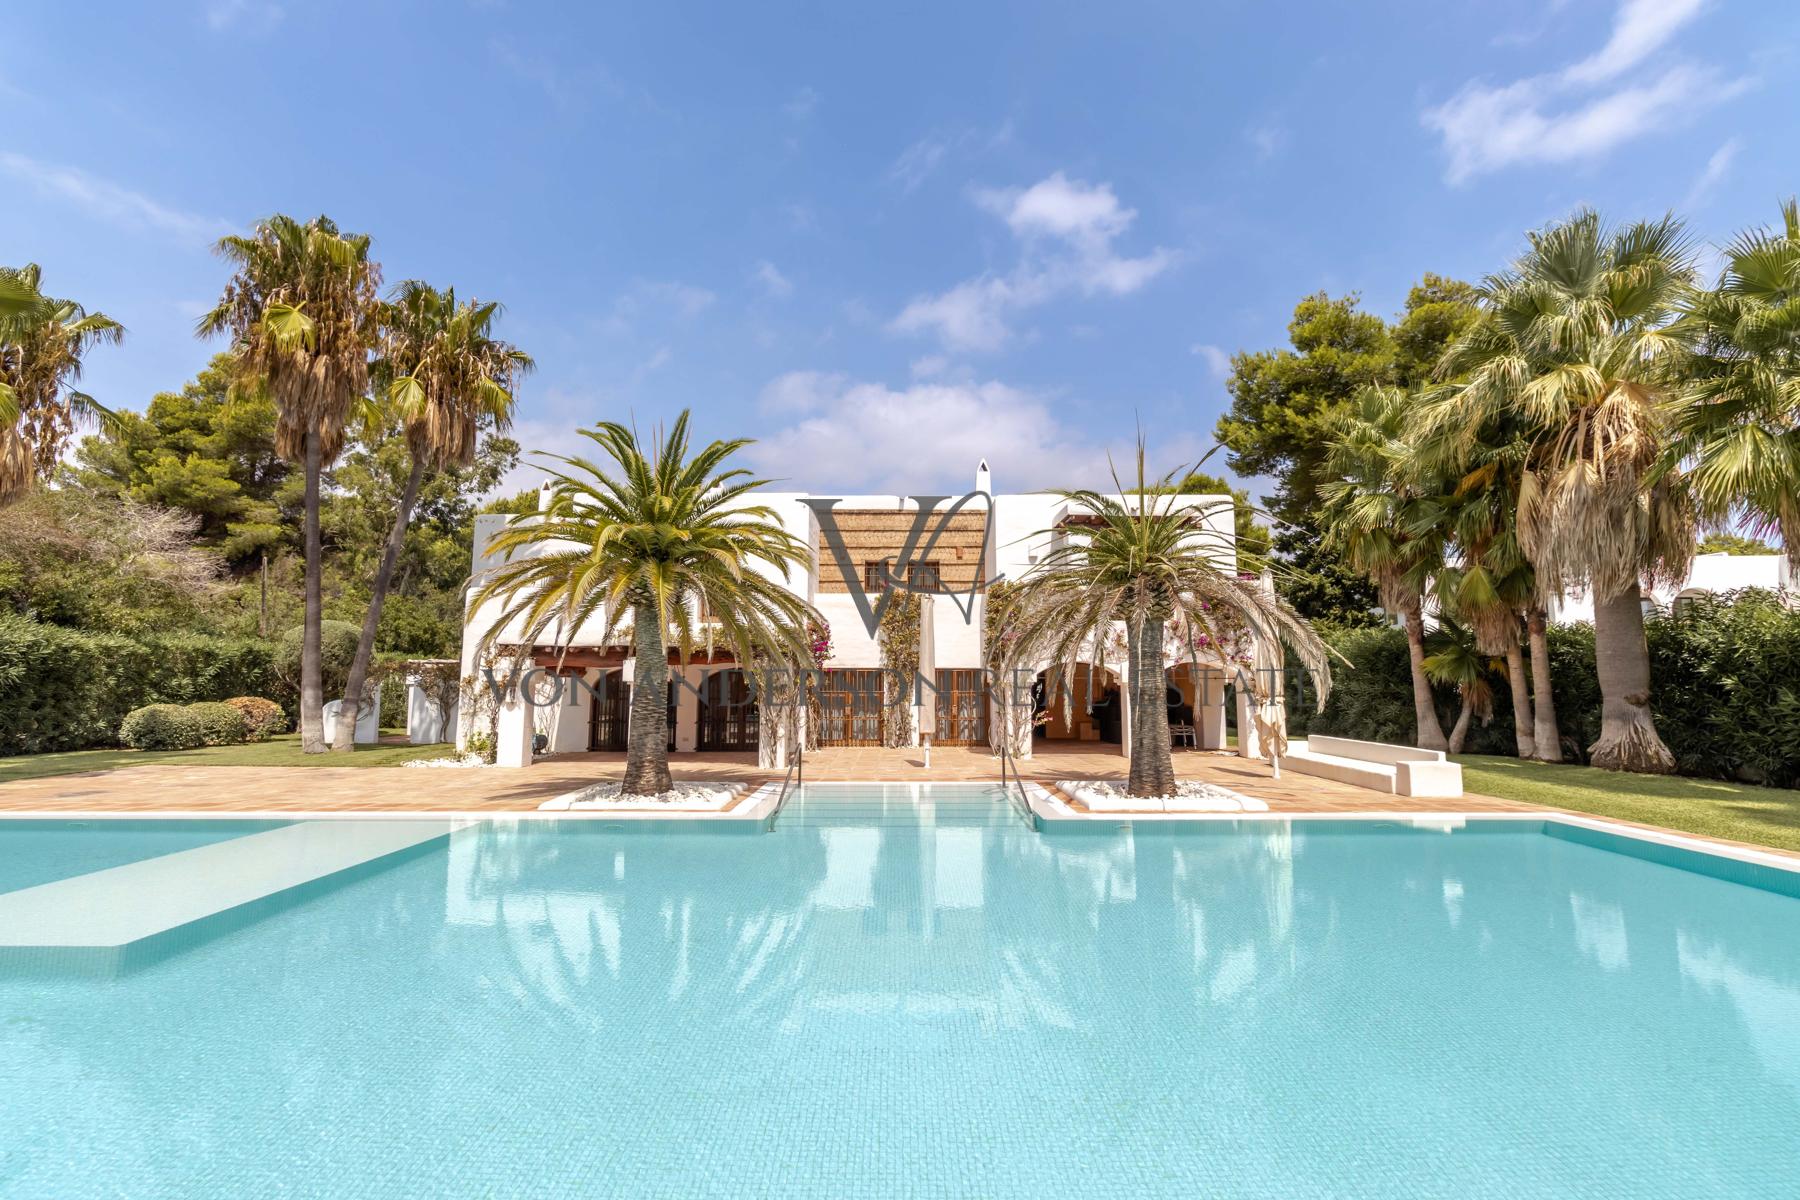 Stunningly Designed Blakstad Frontline Villa Featuring a Huge Spacious Pool, ref. VA1023, for sale in Ibiza by Von Anderson Real Estate